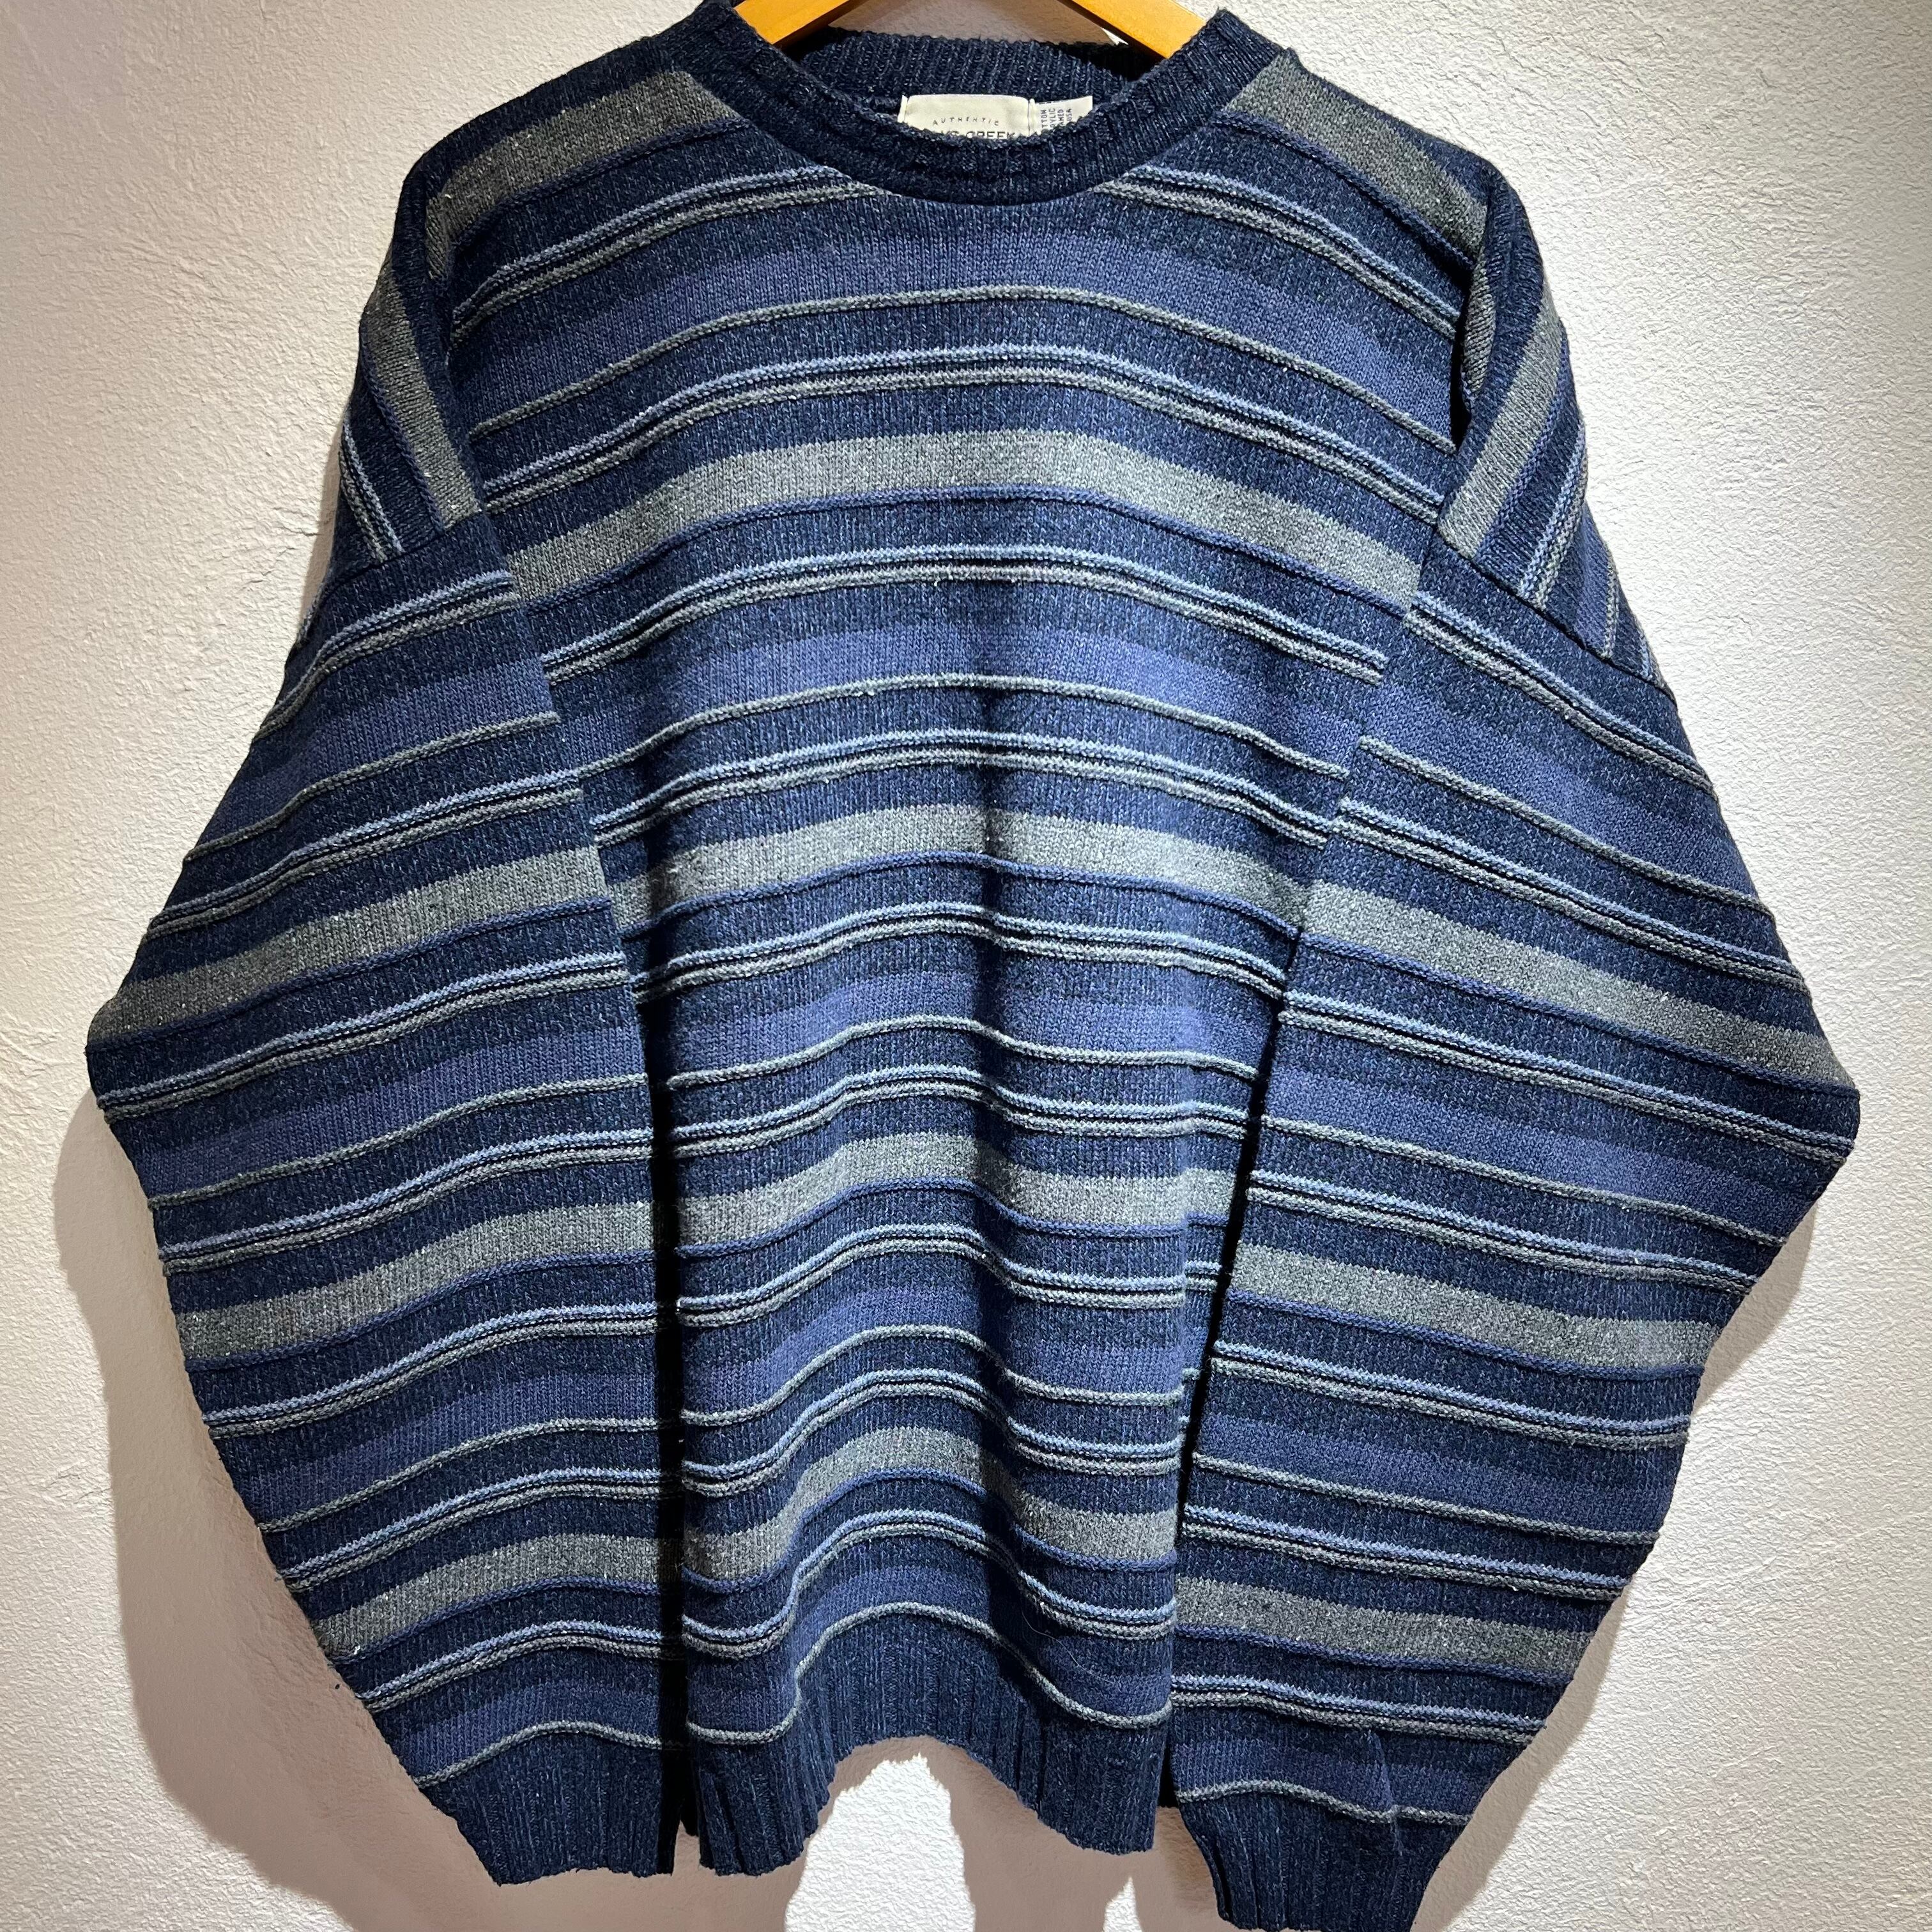 90s made in France border knit sweater